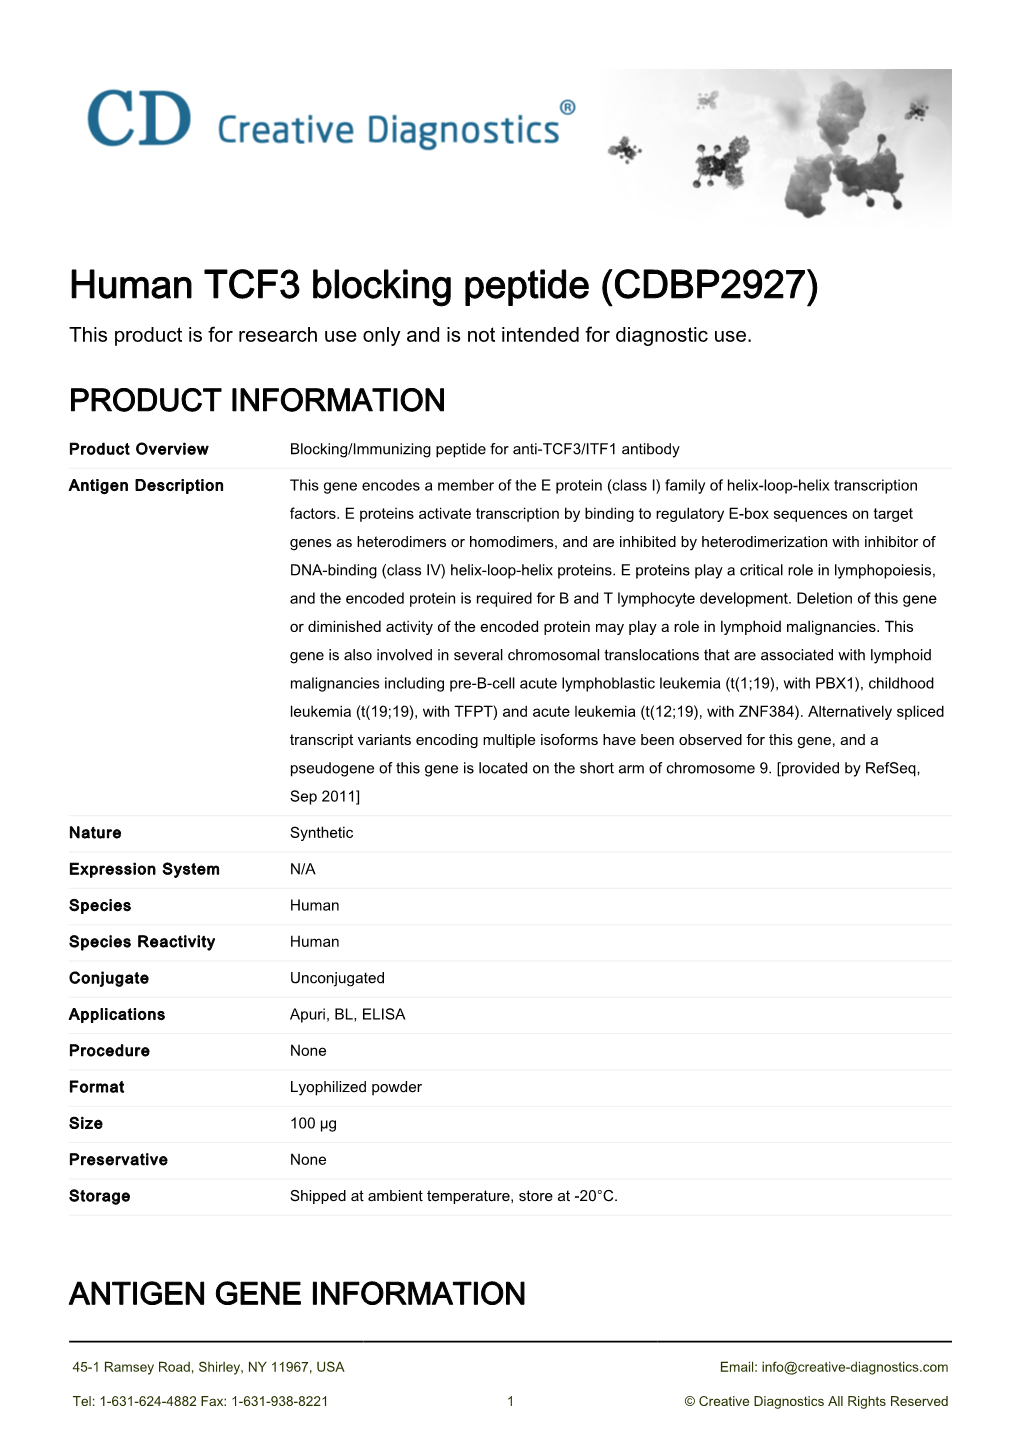 Human TCF3 Blocking Peptide (CDBP2927) This Product Is for Research Use Only and Is Not Intended for Diagnostic Use